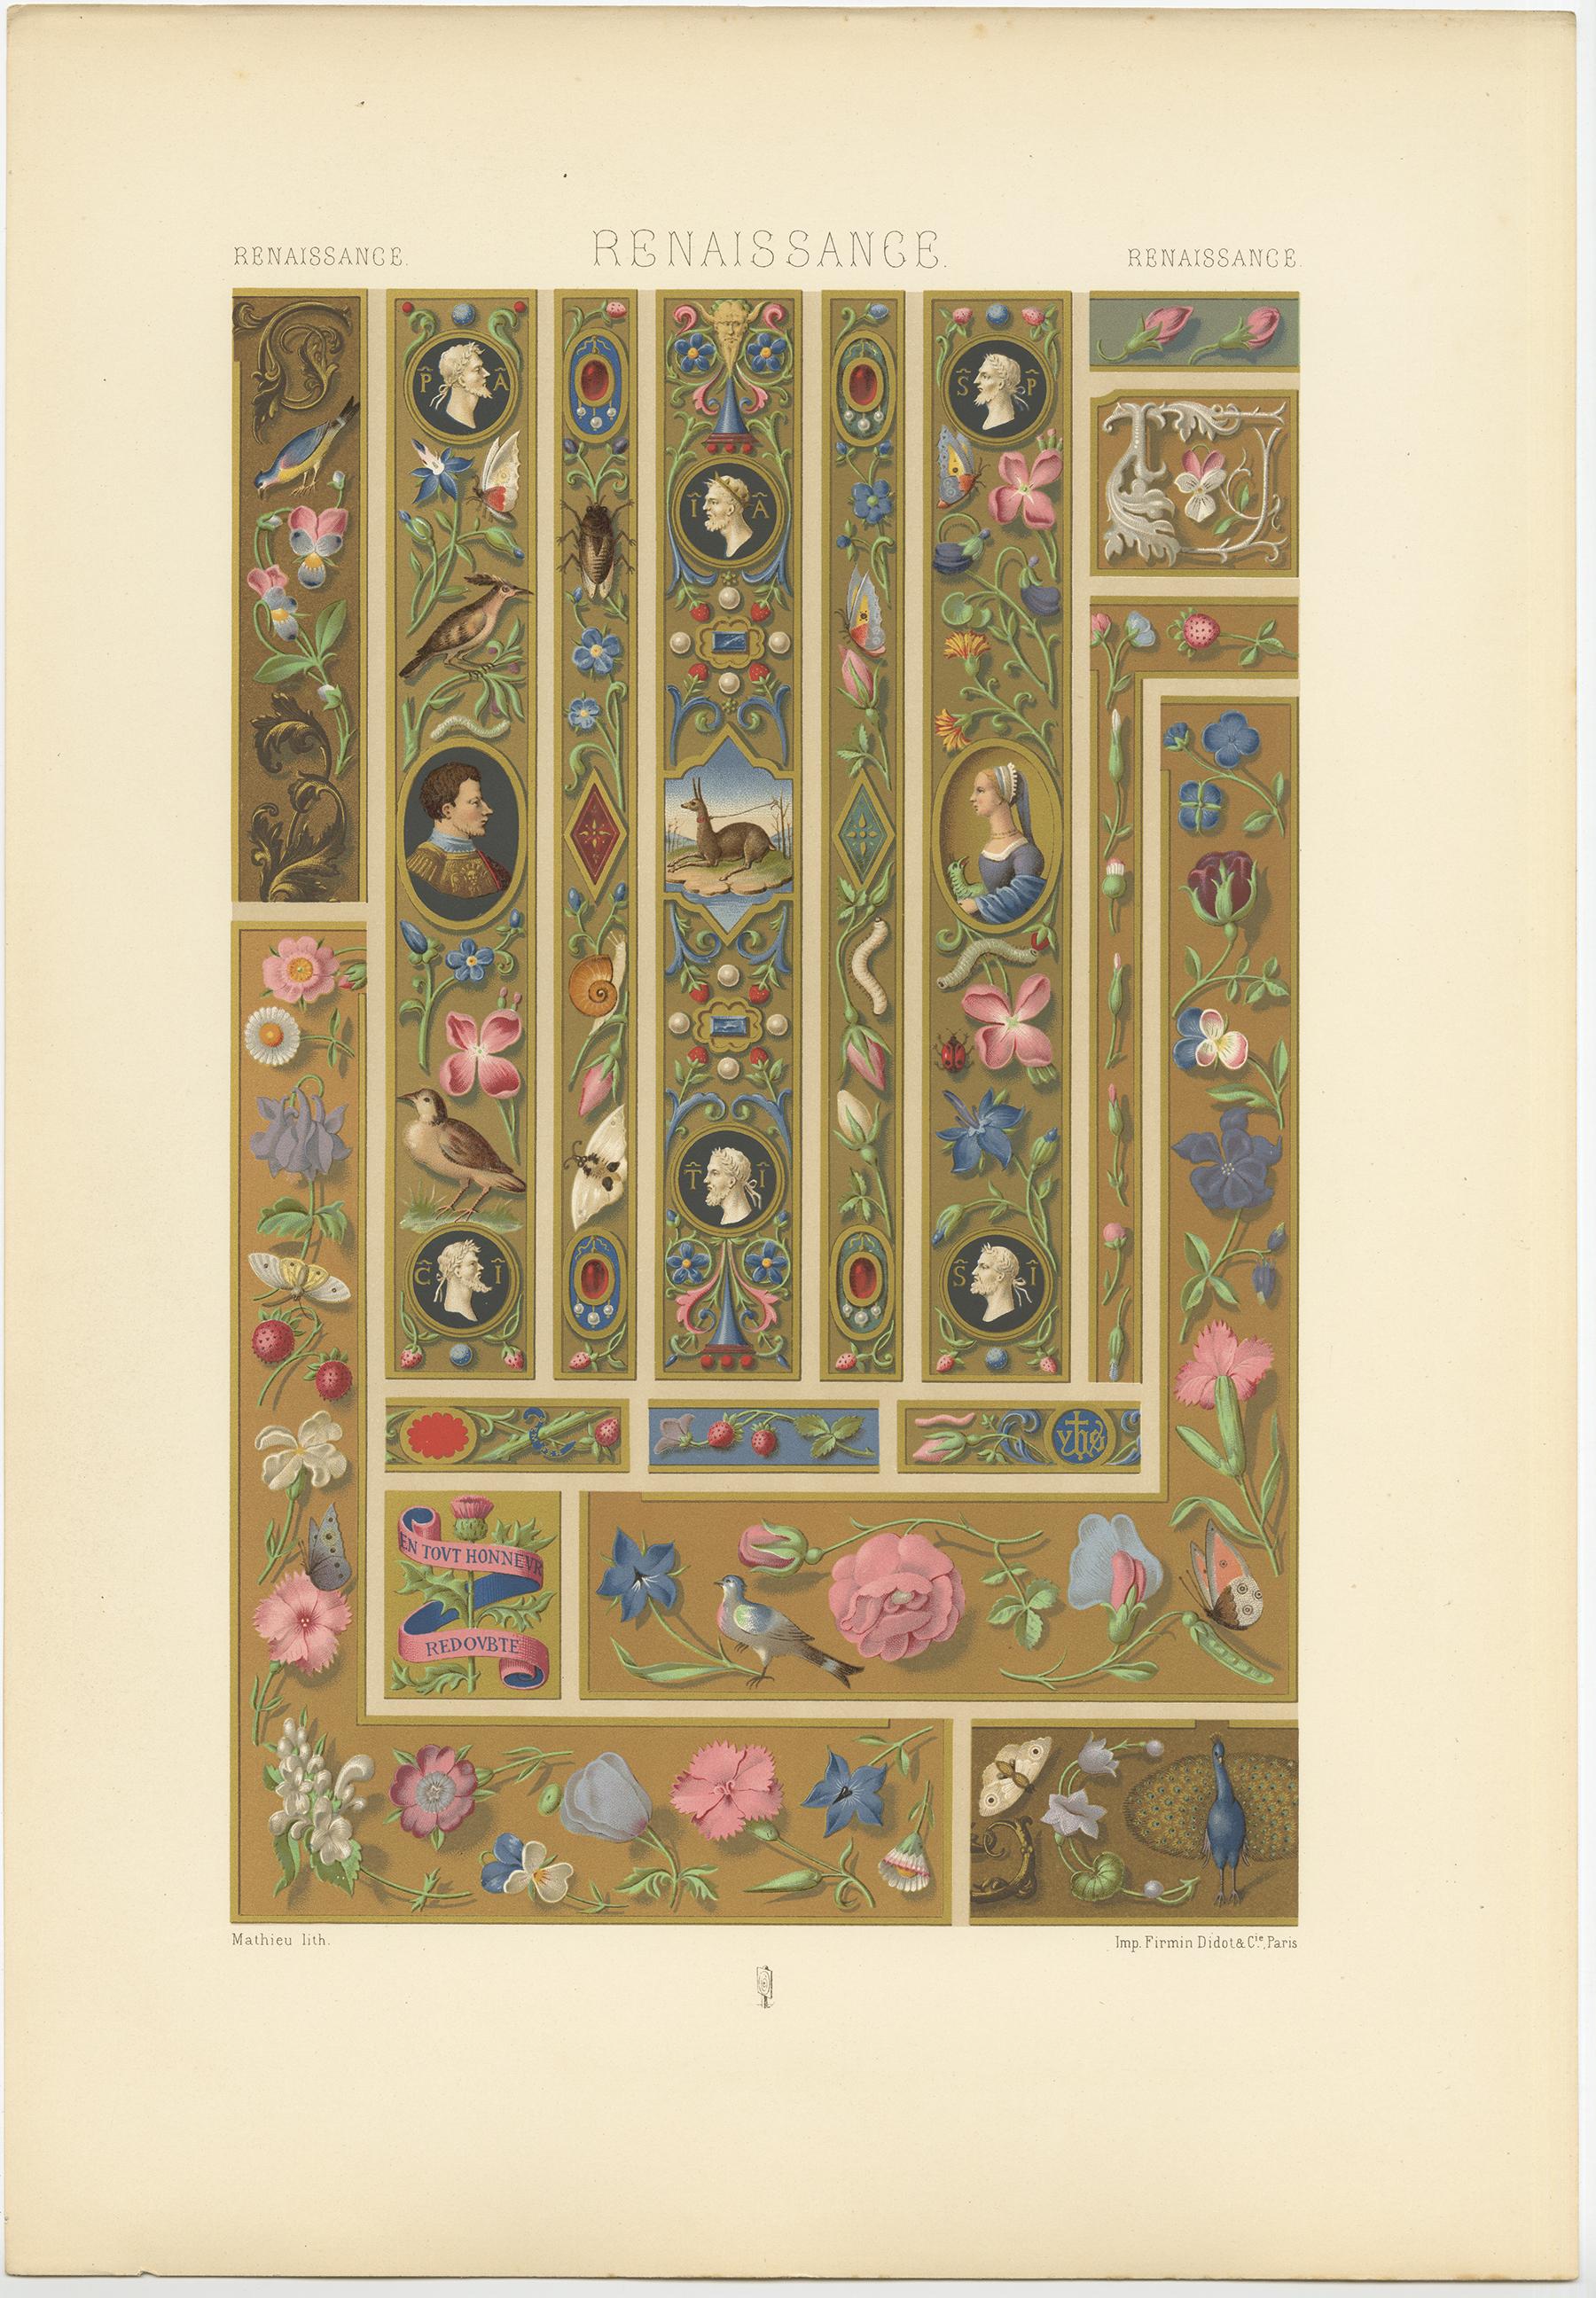 Antique print titled 'Renaissance - Renaissance - Renaissance'. Chromolithograph of margin decorations from manuscripts 15th and 16th centuries ornaments. This print originates from 'l'Ornement Polychrome' by Auguste Racinet. Published circa 1890.